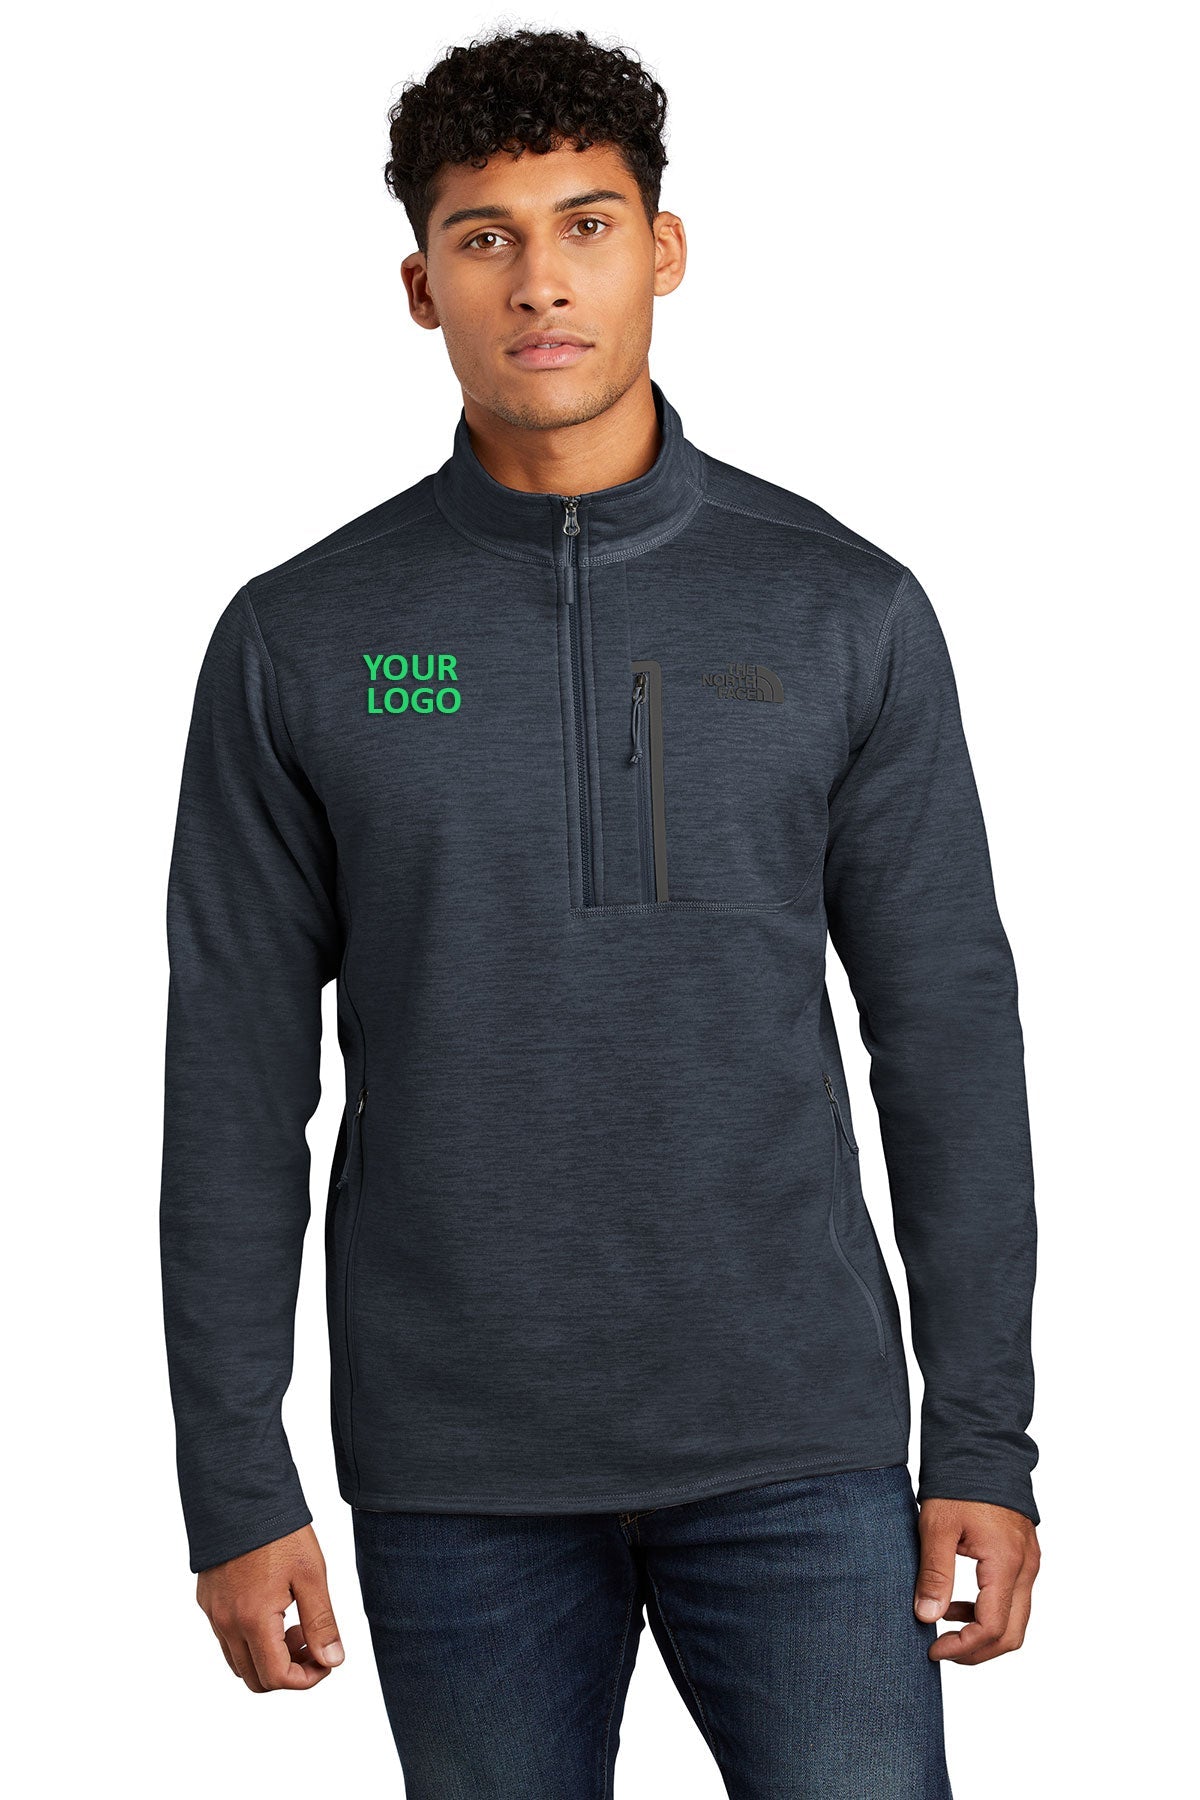 The North Face Urban Navy Heather NF0A47F7 sweatshirts with company logo